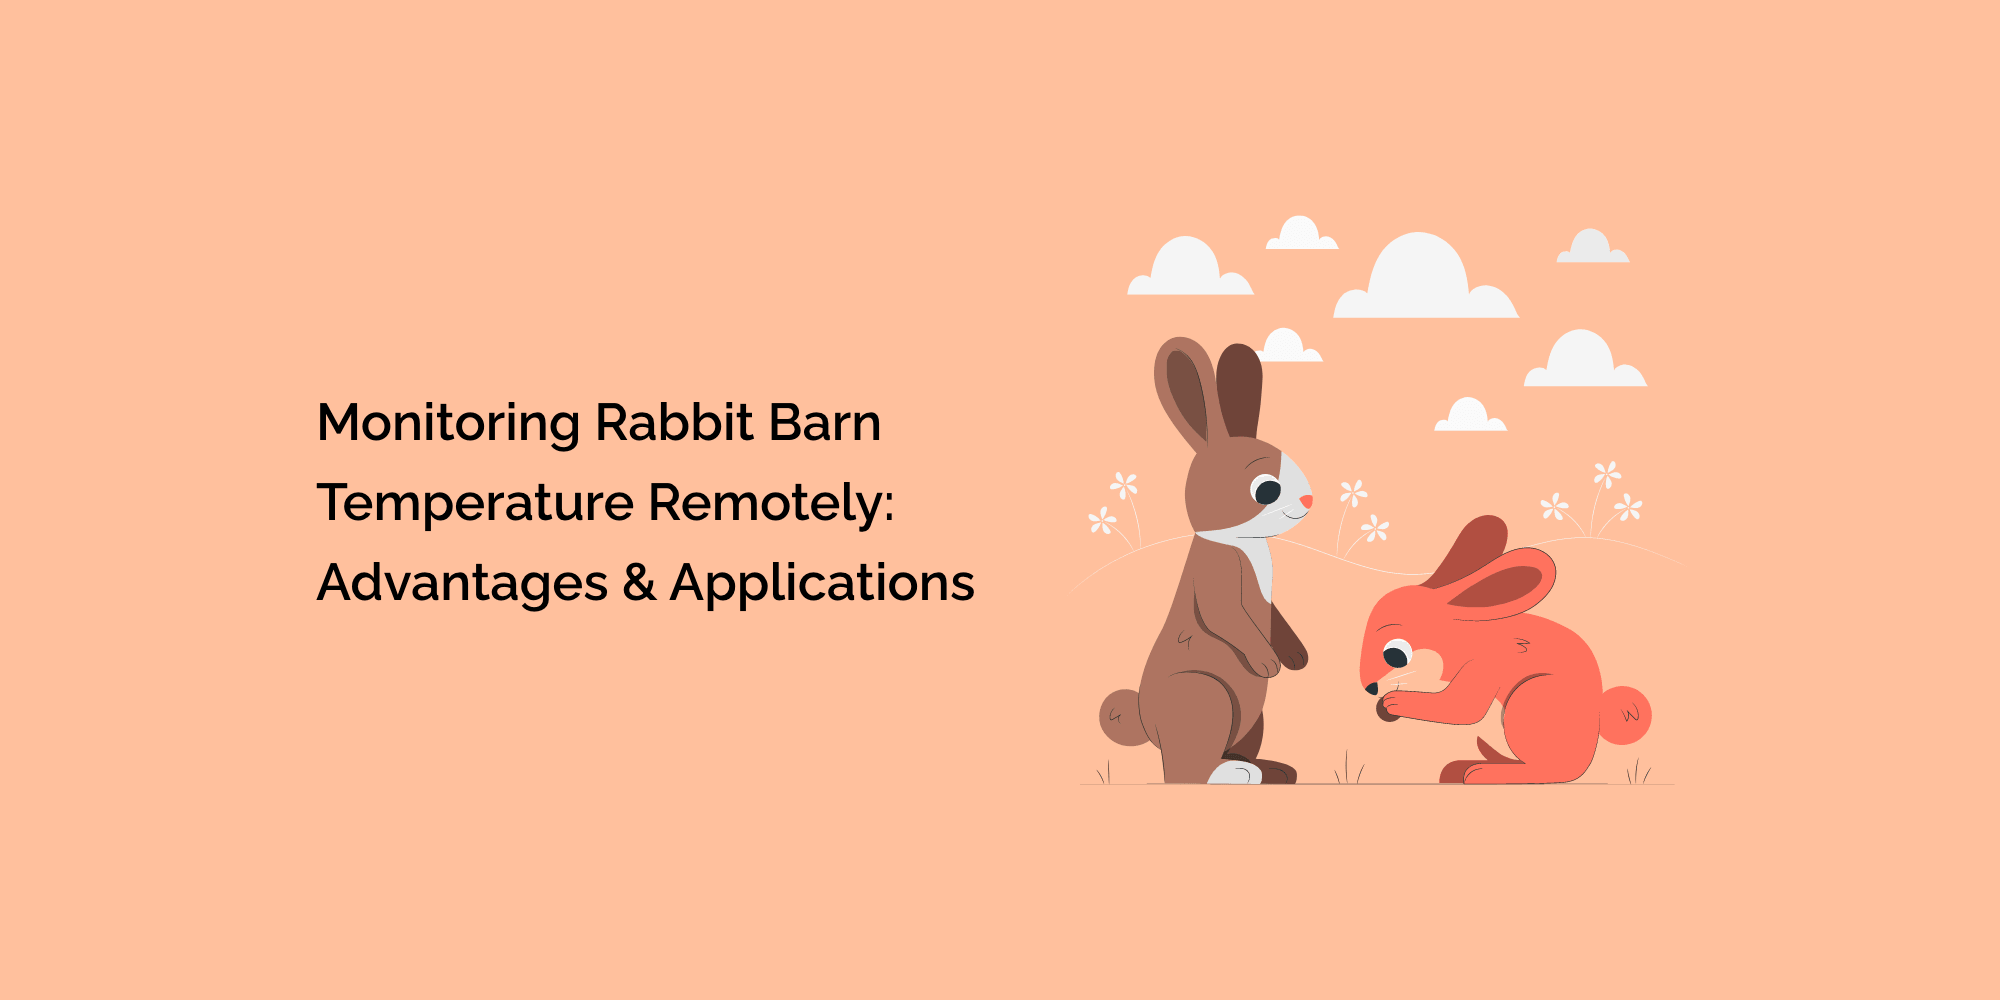 Monitoring Rabbit Barn Temperature Remotely: Advantages and Applications